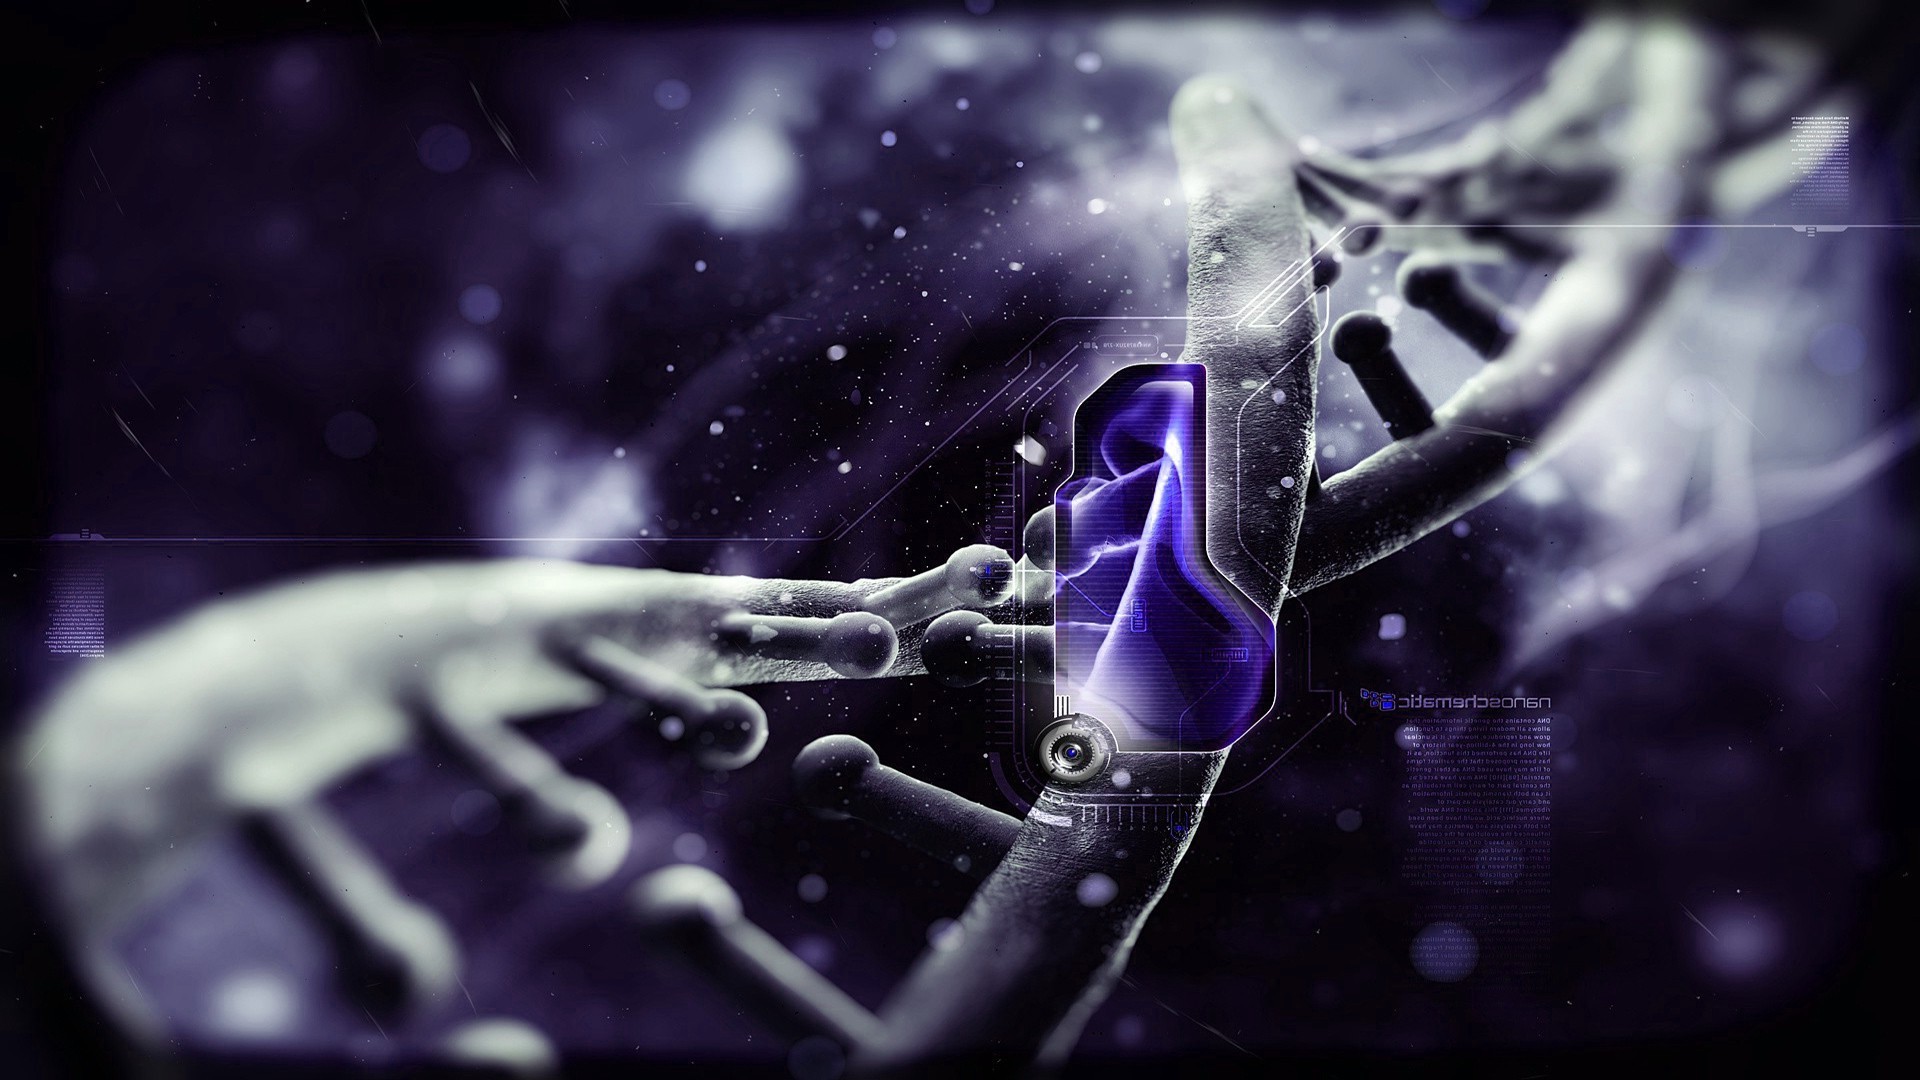 1920x1080, Dna, Simple Background, Simple, Video Games - Dna Background Cool - HD Wallpaper 